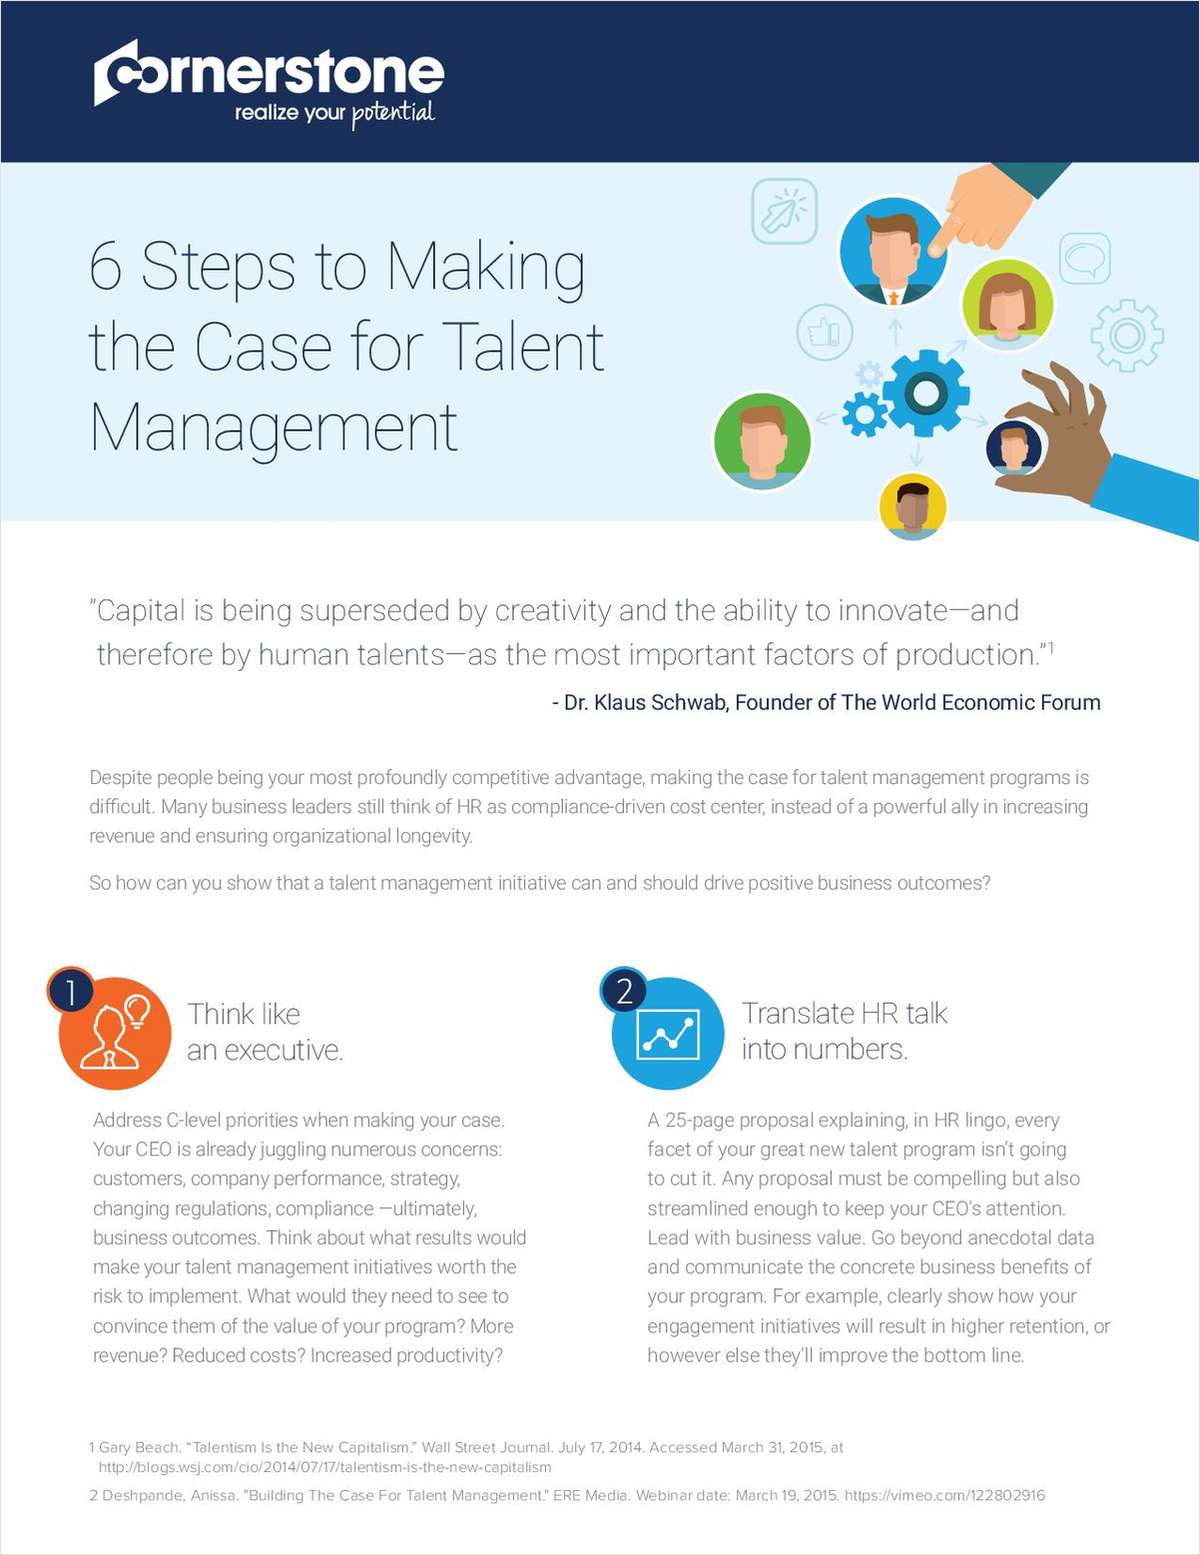 6 Steps to Making the Case for Talent Management